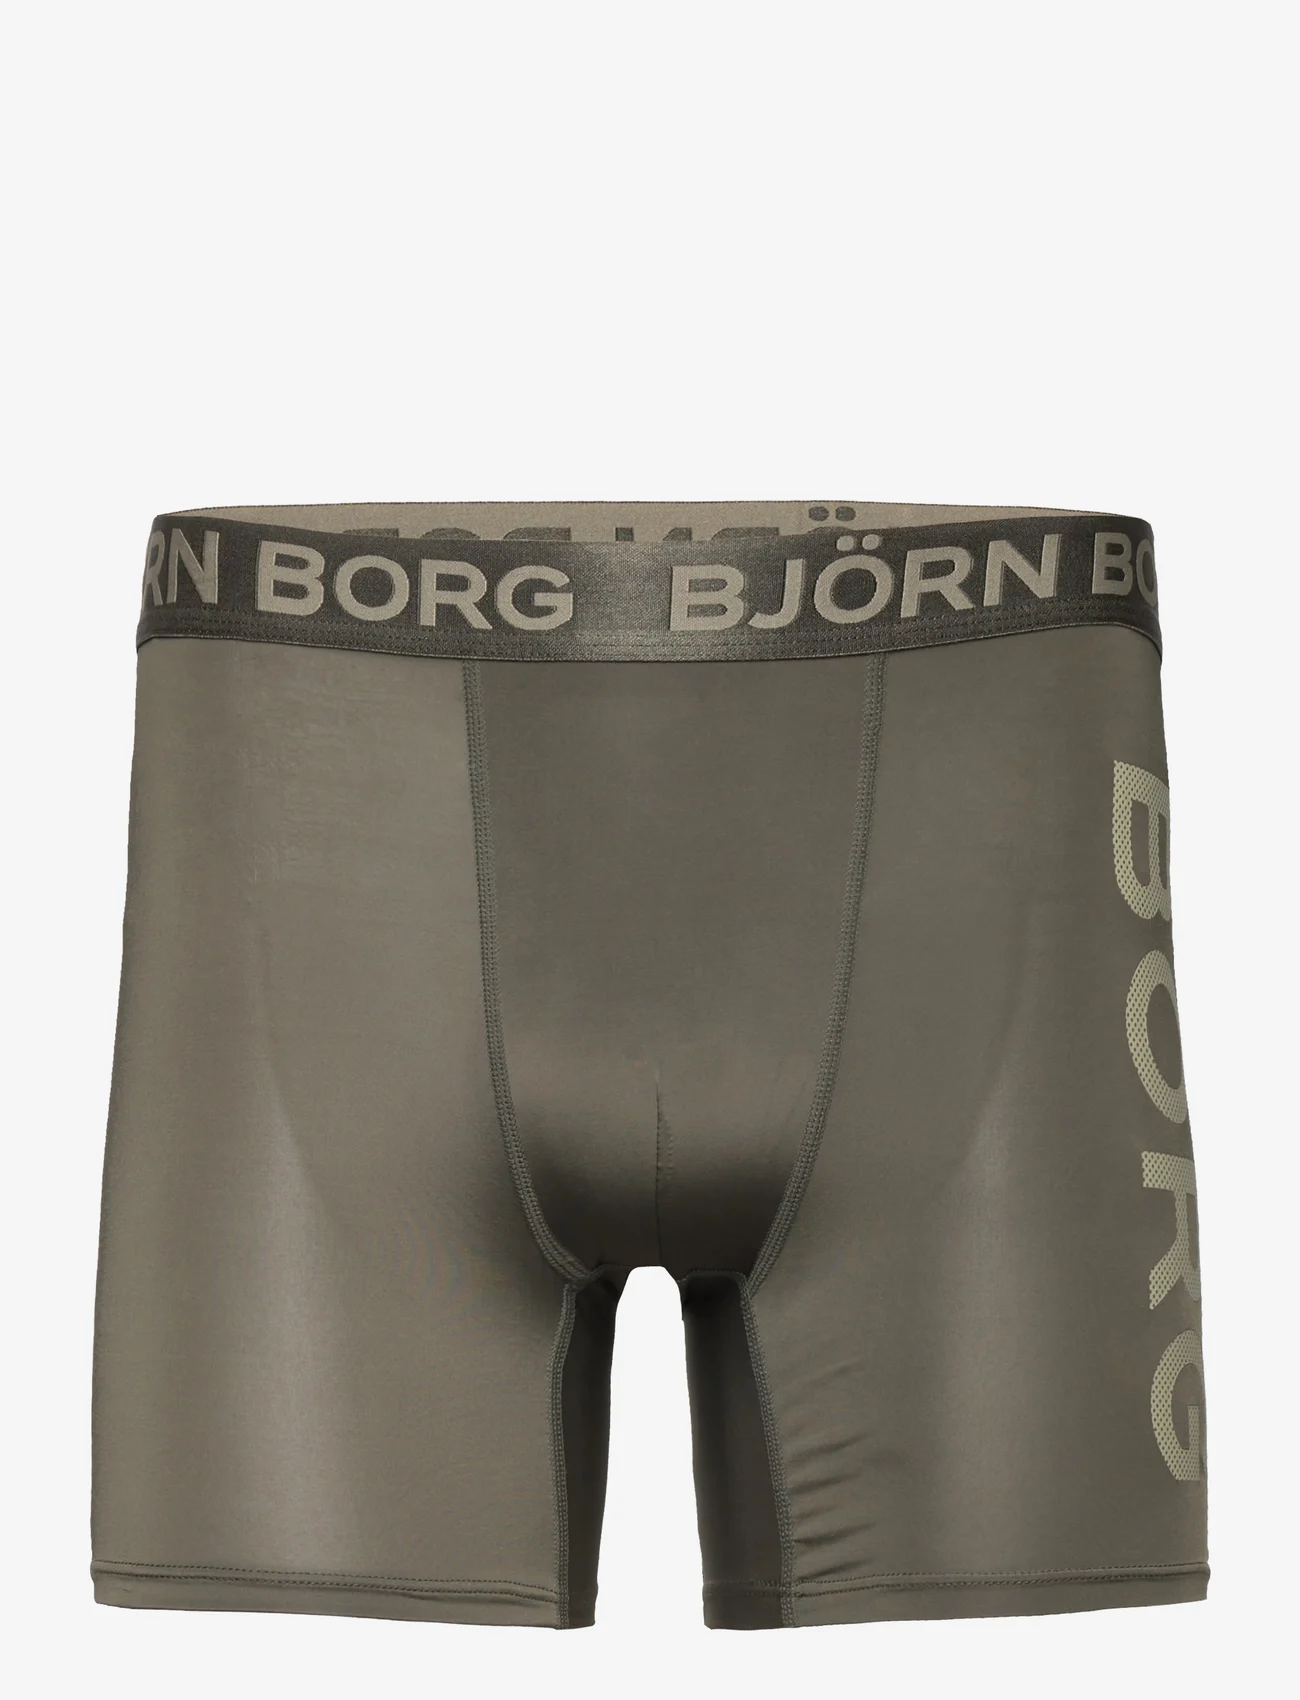 Björn Borg - PERFORMANCE BOXER 3p - nordic style - multipack 2 - 2